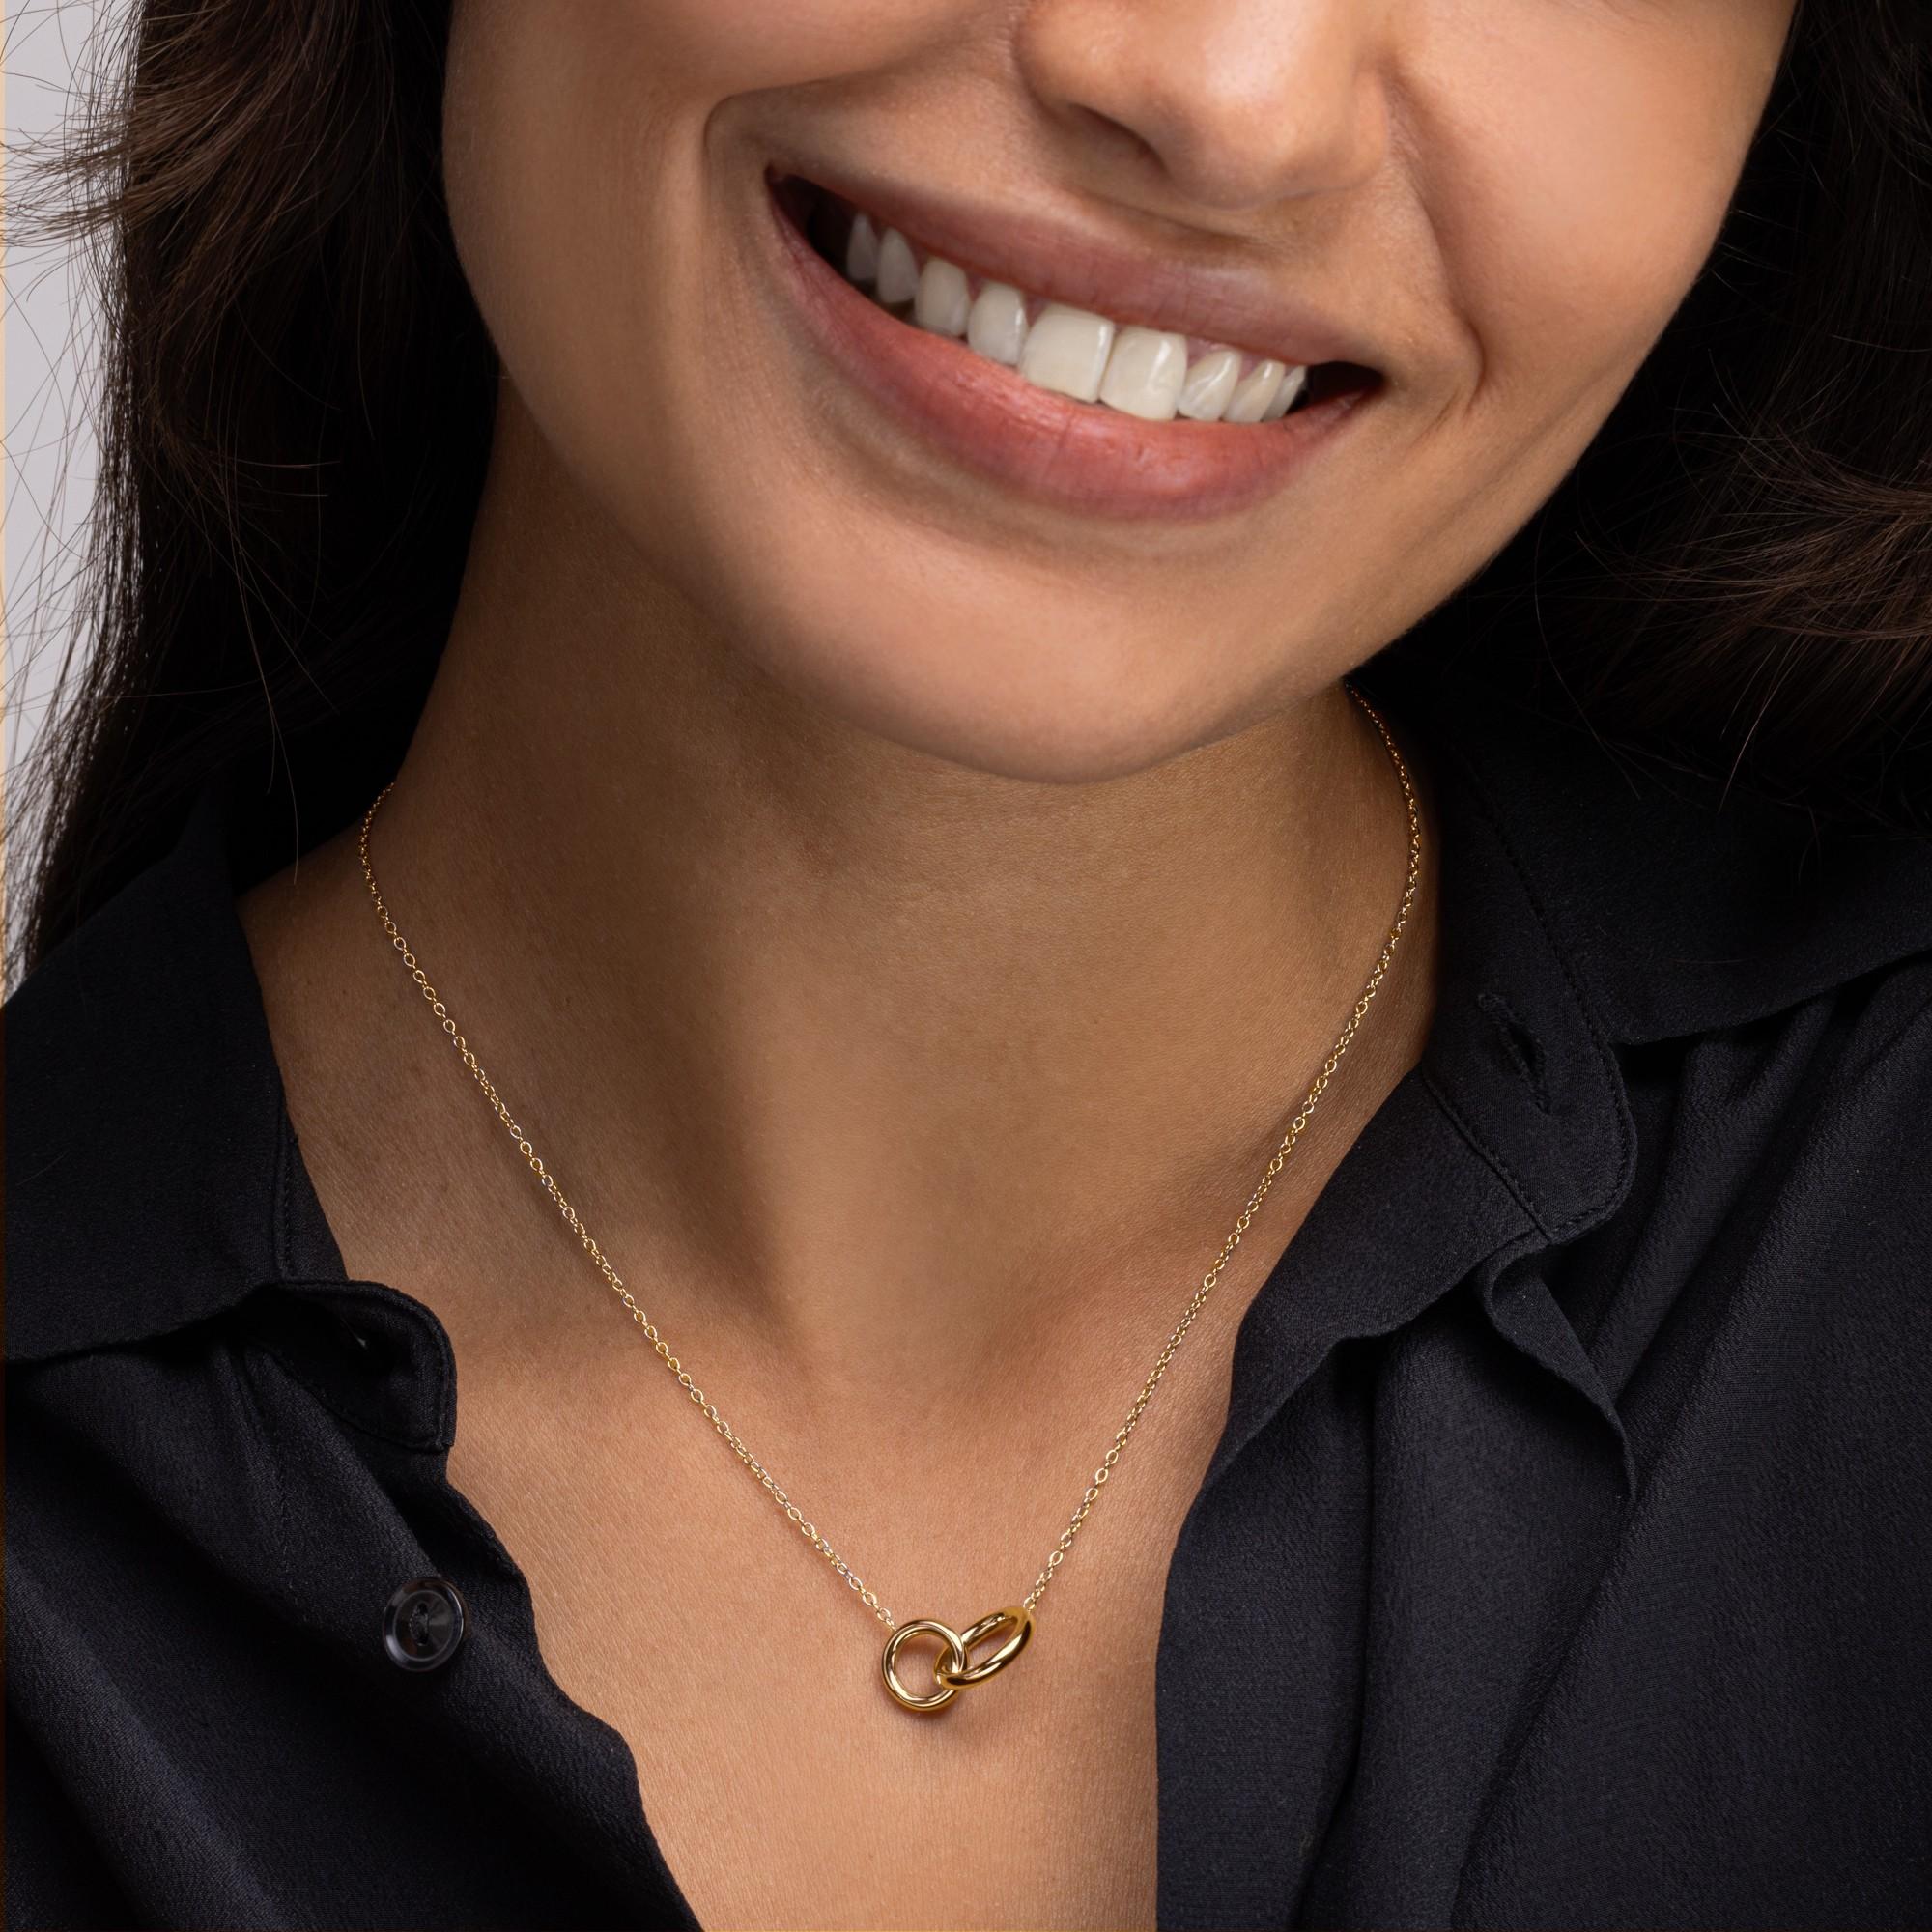 Alex Jona design collection, hand crafted in Italy, 18 karat yellow gold interlocking hoop chain necklace.

Alex Jona jewels stand out, not only for their special design and for the excellent quality of the gemstones, but also for the careful